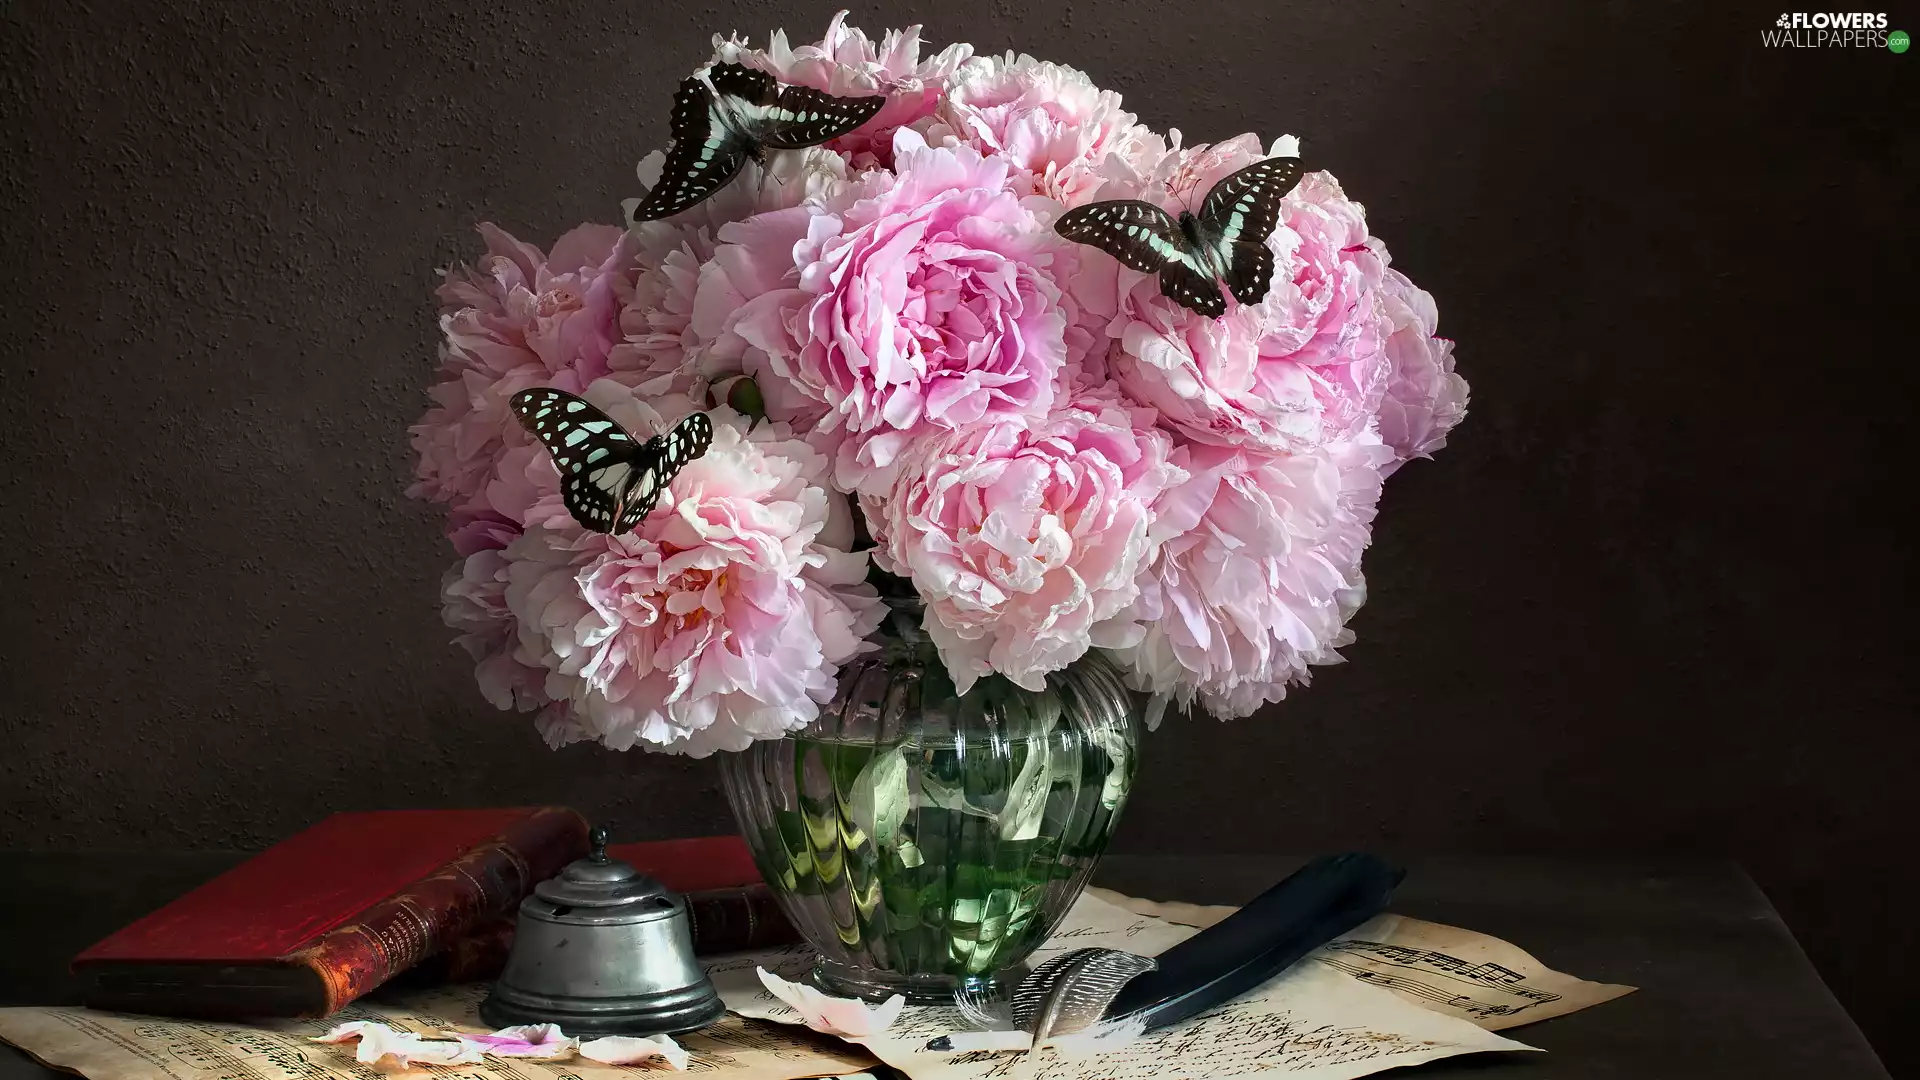 butterflies, glass, composition, Vase, Books, Peonies, Pink, bell